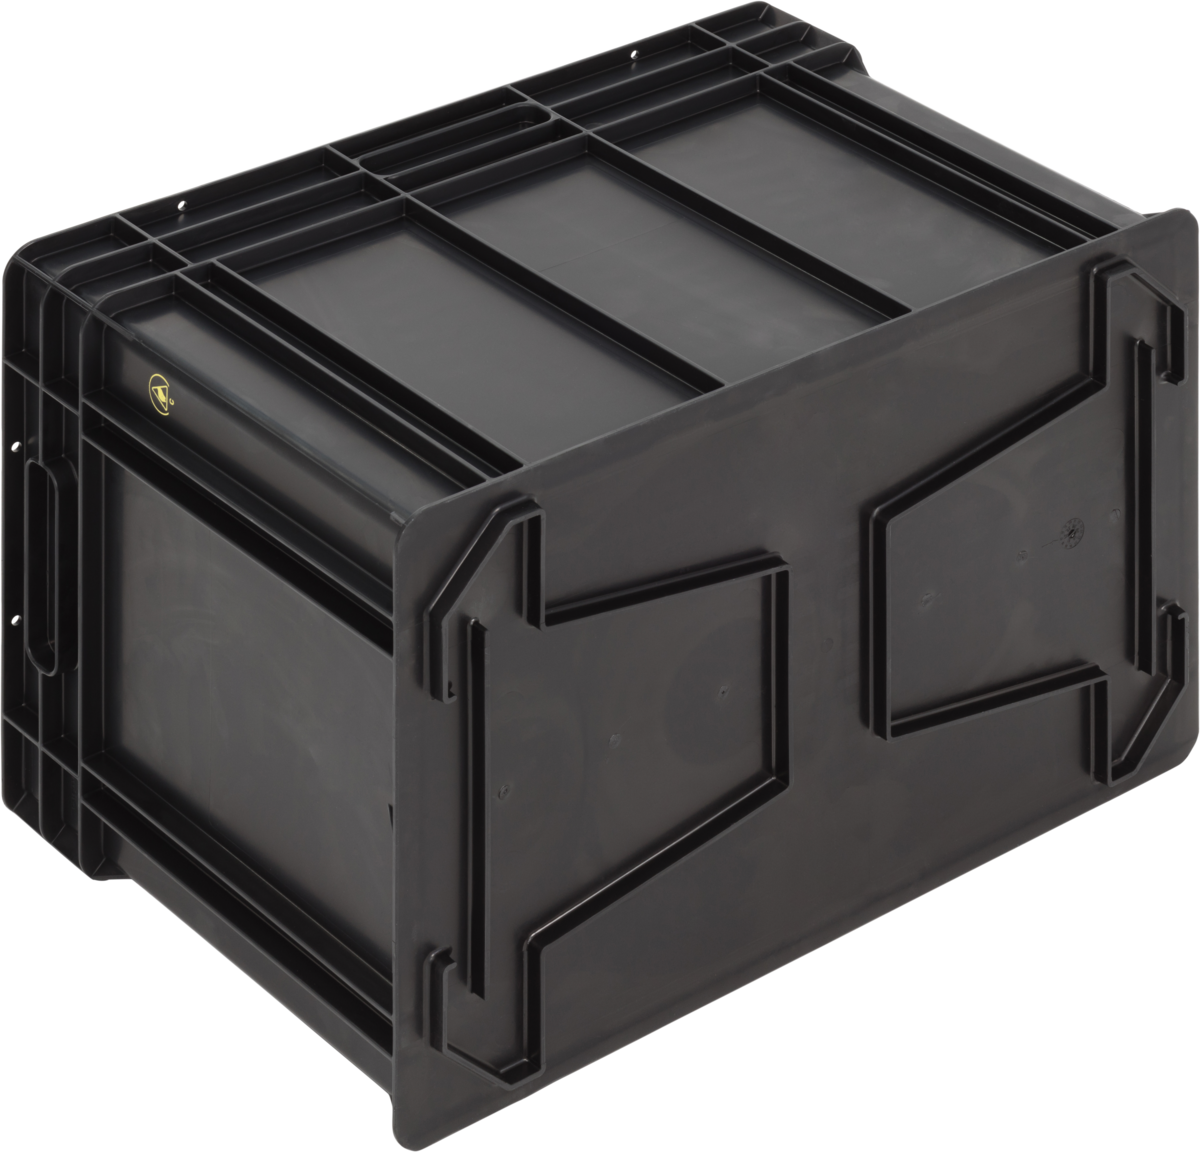 ESD-Safe-SGL-Norm-Stacking-Bin-Containers-SGL-Base-Ref.-6440.000.992_1004528_600x400x412_02